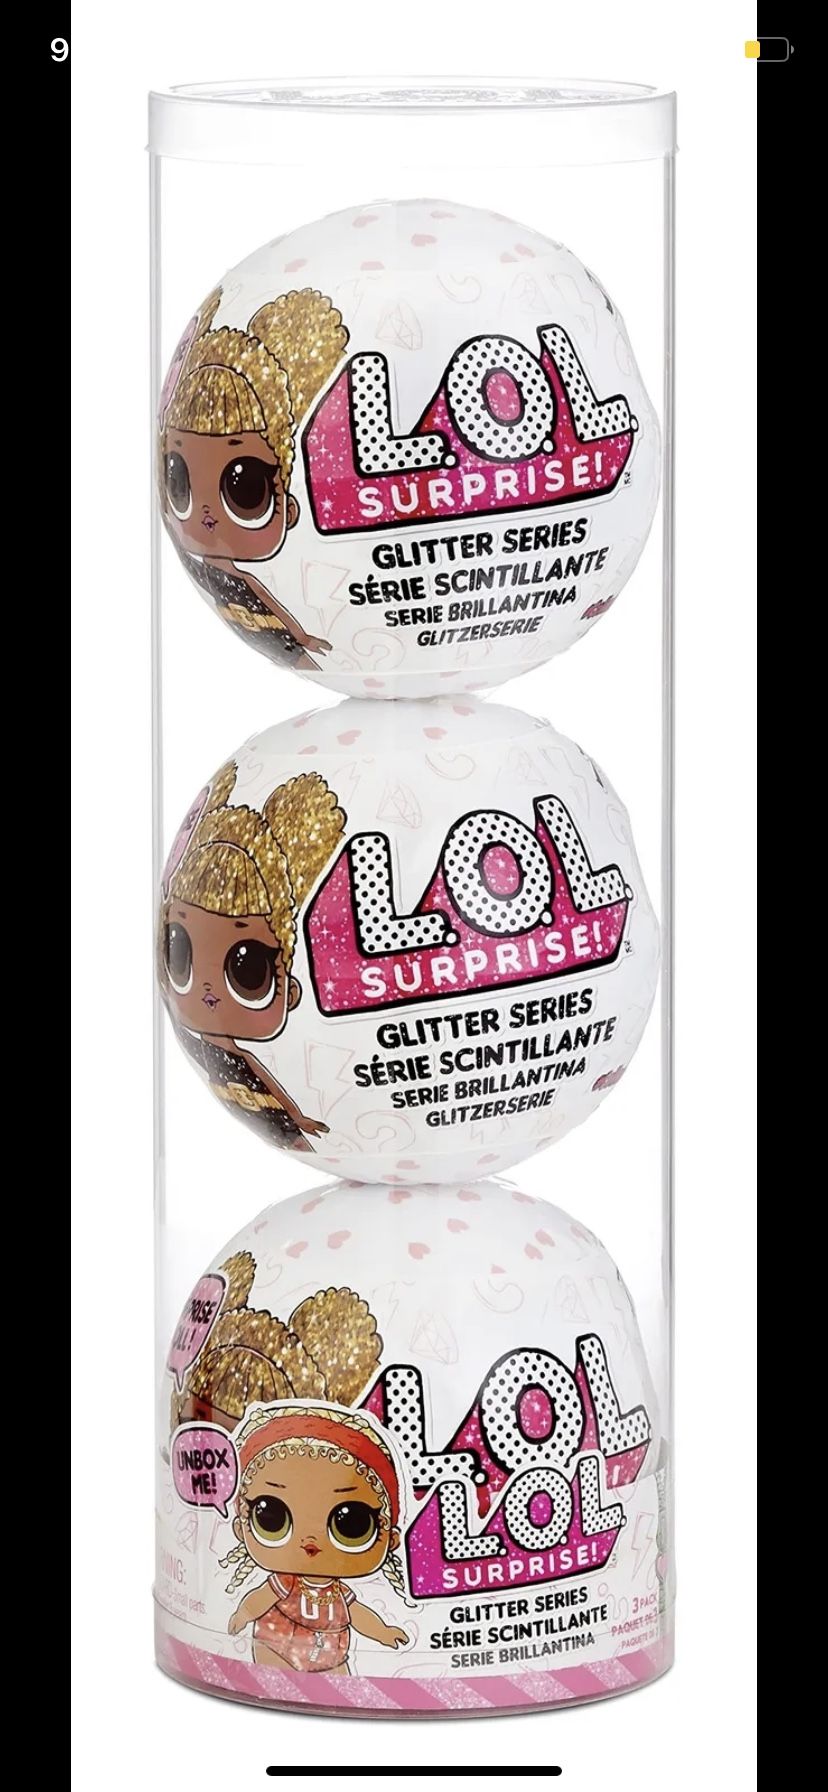 LOL Surprise Glitter Series Style 1 Dolls- 3 Pack, Each with 7 Surprises Incl...